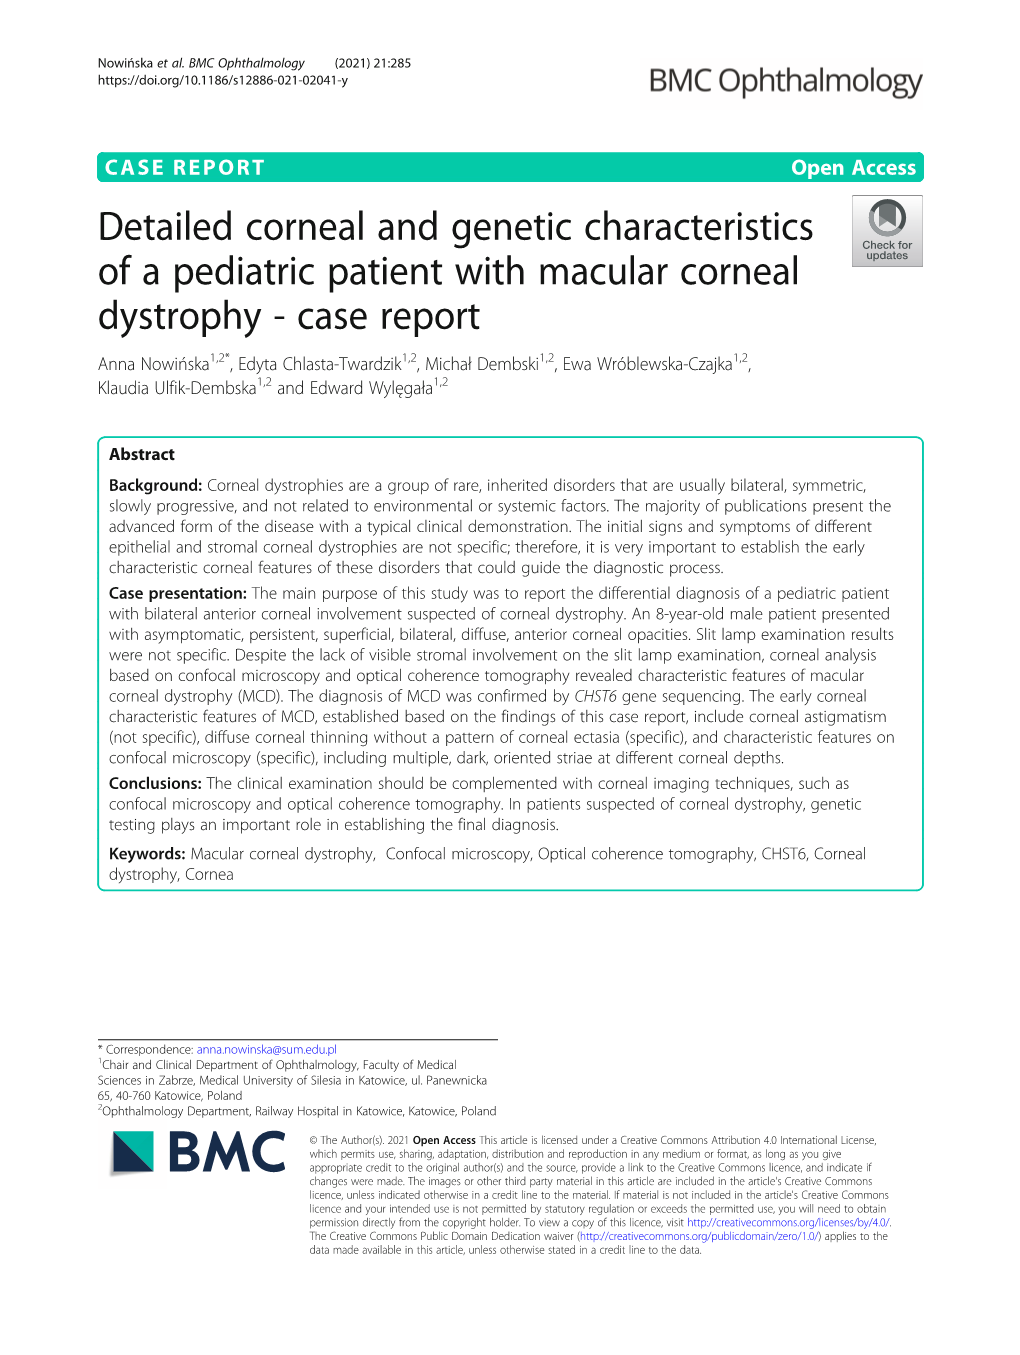 Detailed Corneal and Genetic Characteristics of a Pediatric Patient